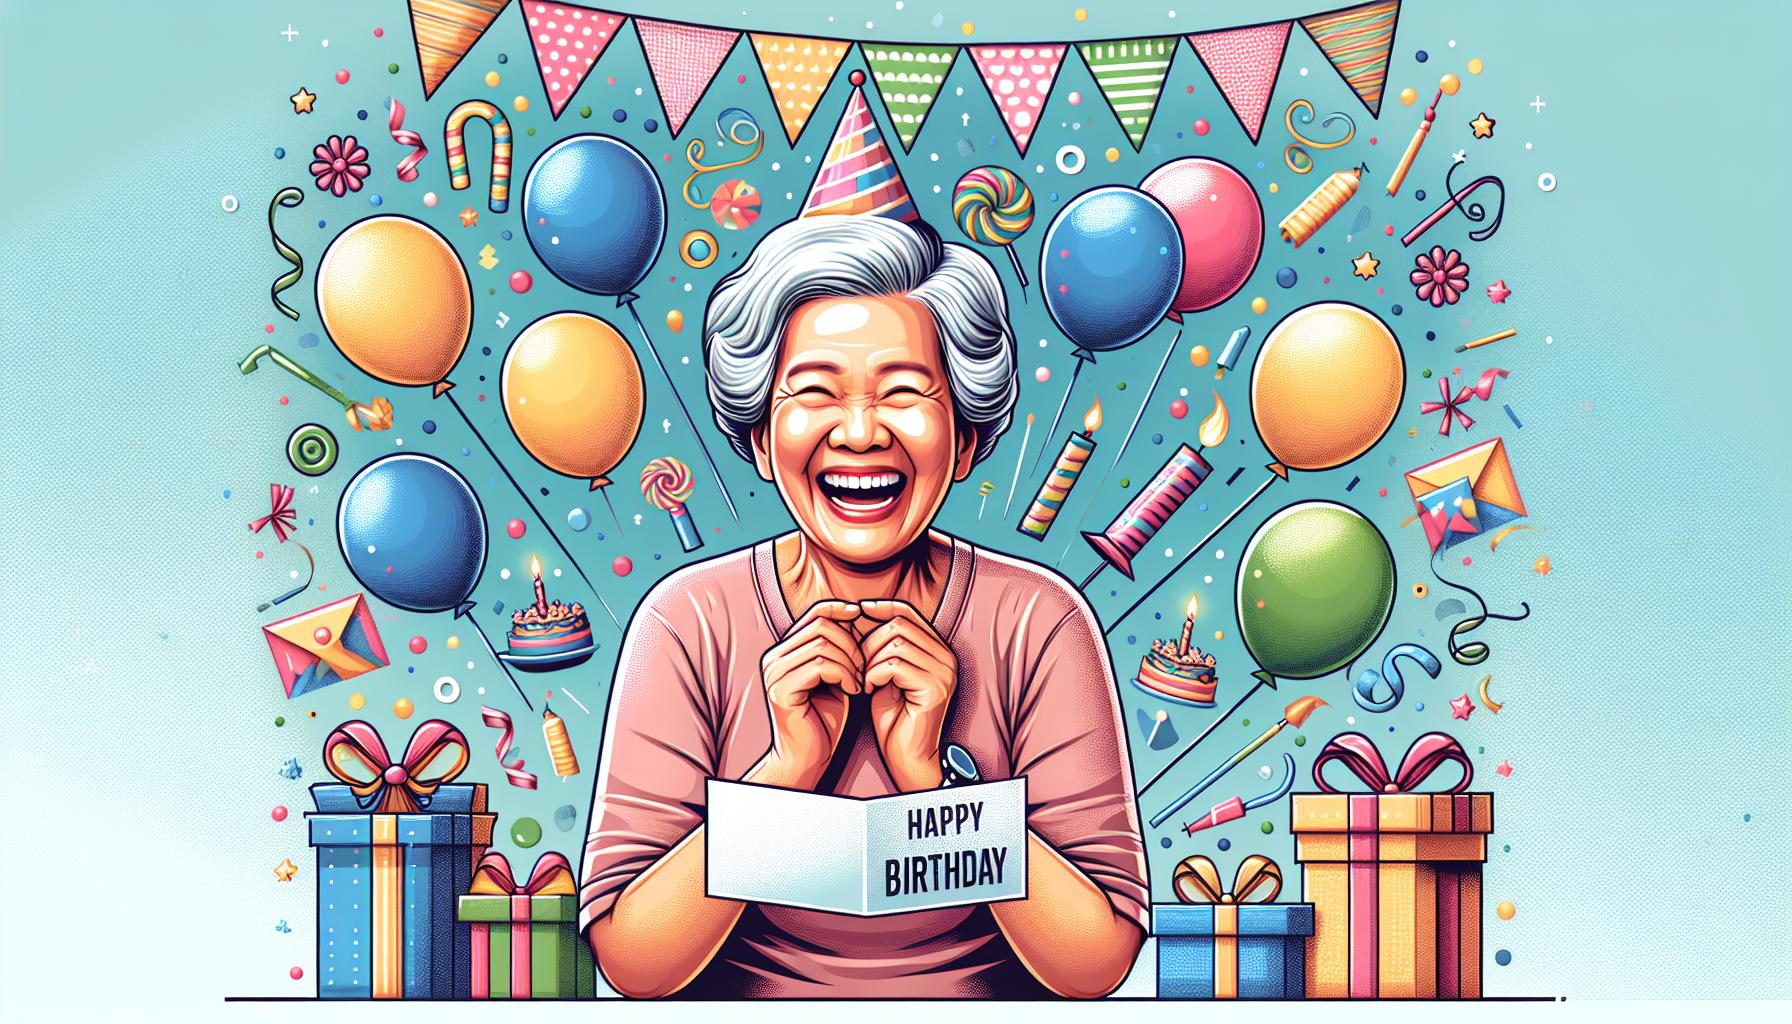 Crafting Vibrant Birthday Greetings for Your Young-at-Heart Grandmother